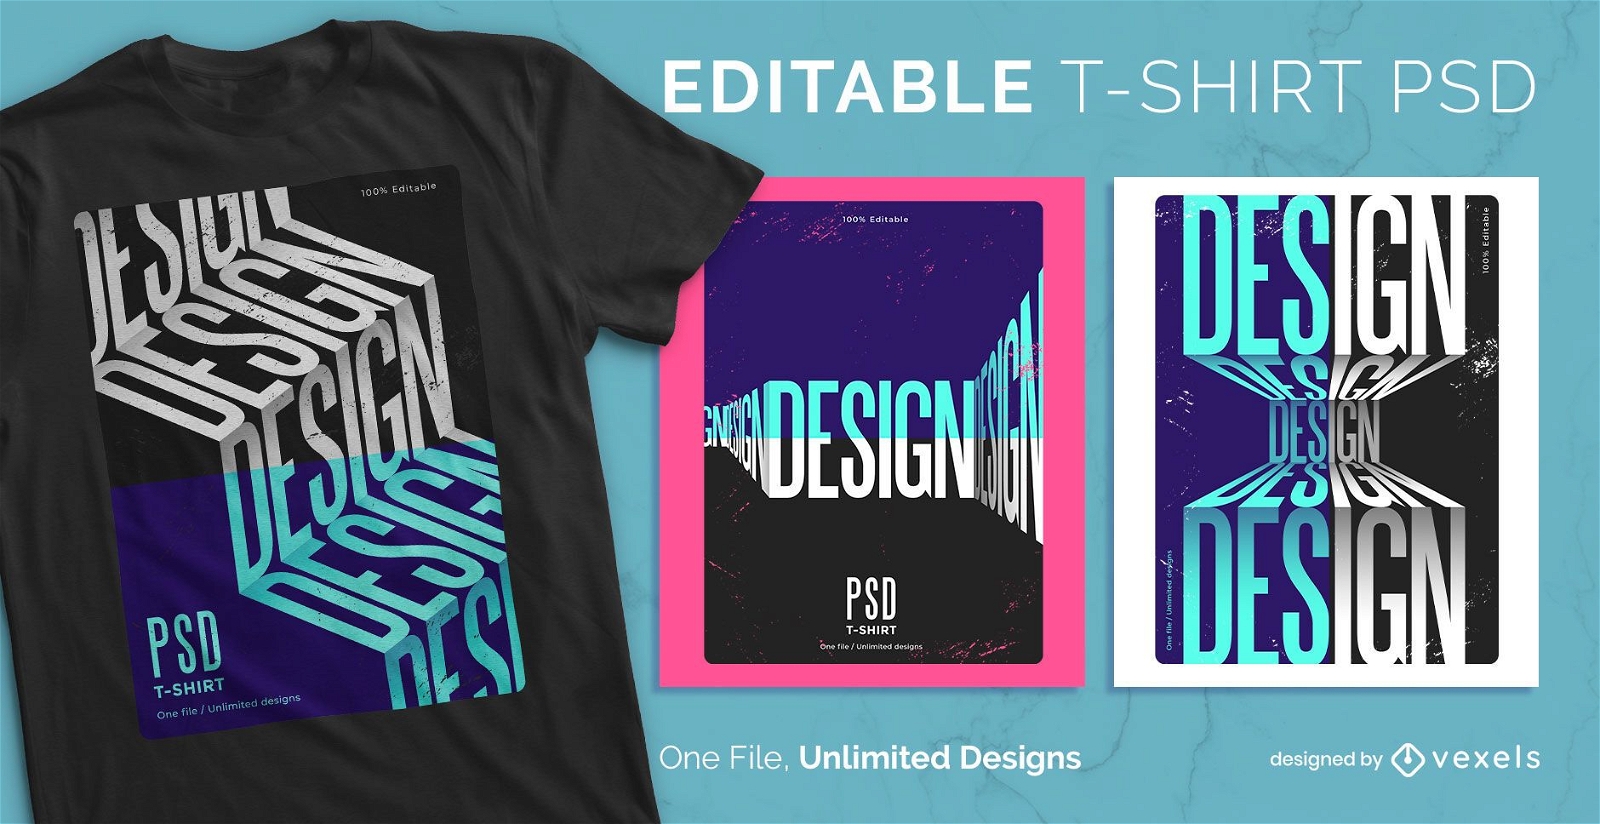 Perspectives scalable t-shirt psd